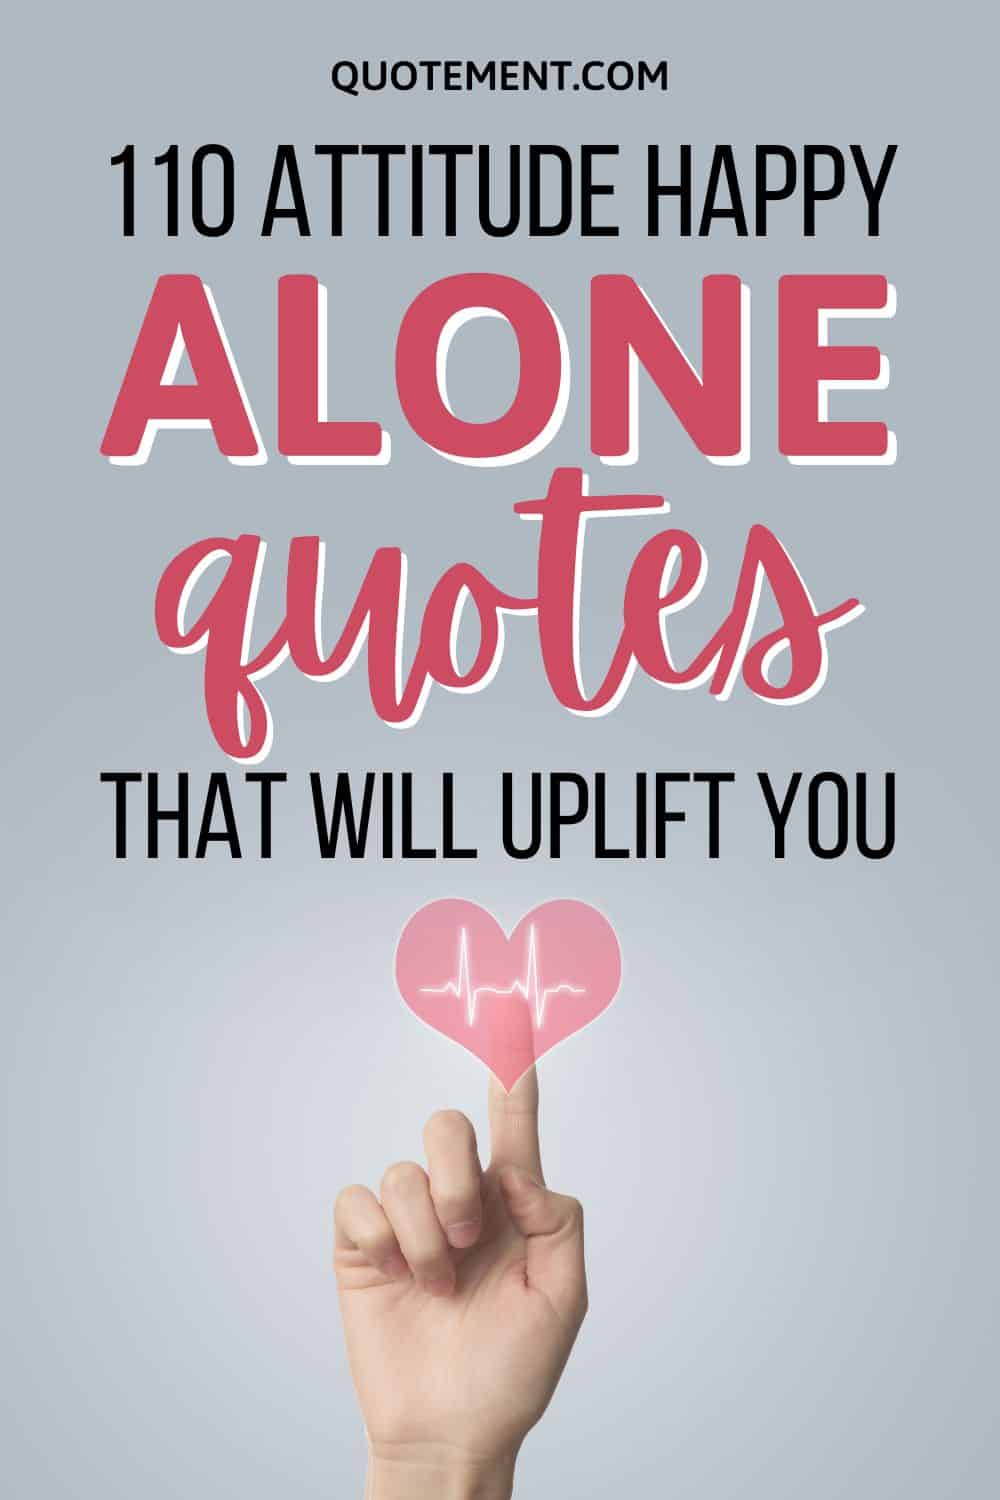 110 Attitude Happy Alone Quotes That Will Uplift You pinterest